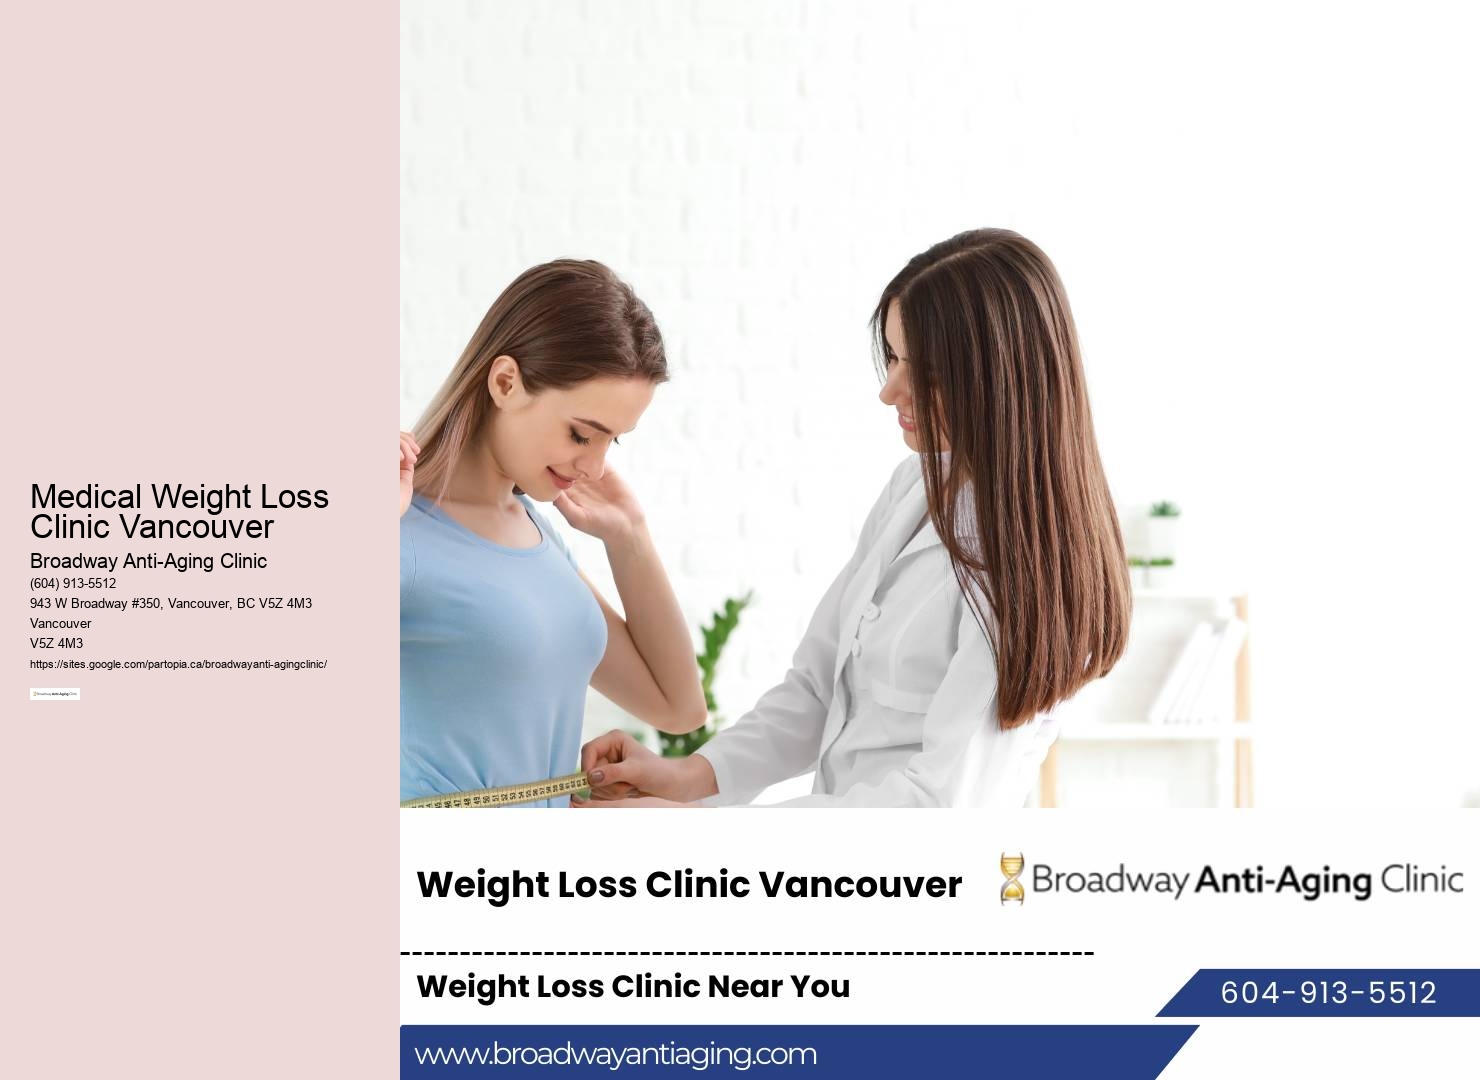 Medical Weight Loss Clinic Vancouver